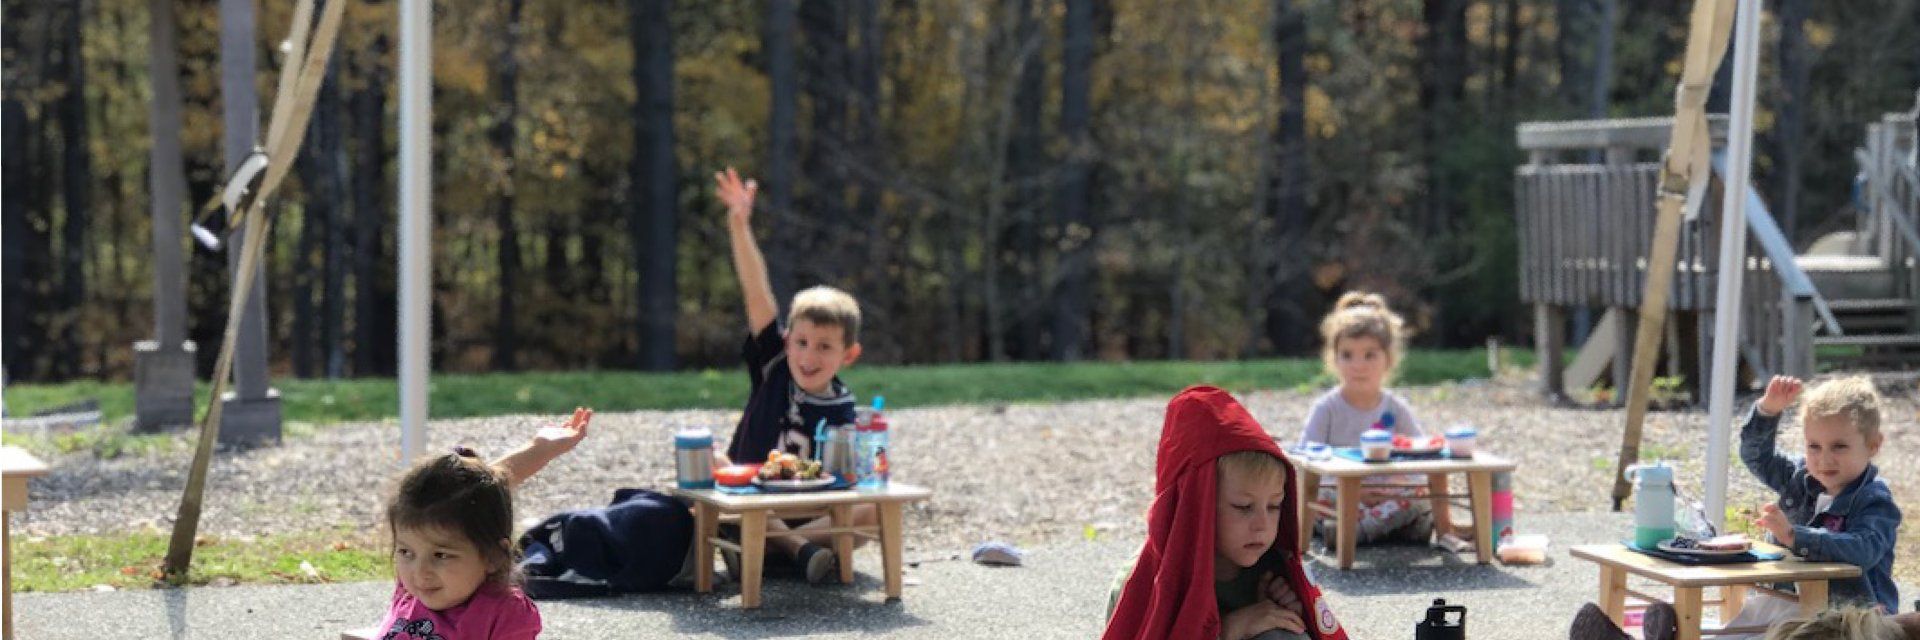 Preschool aged children eating lunch outdoors at individual tables